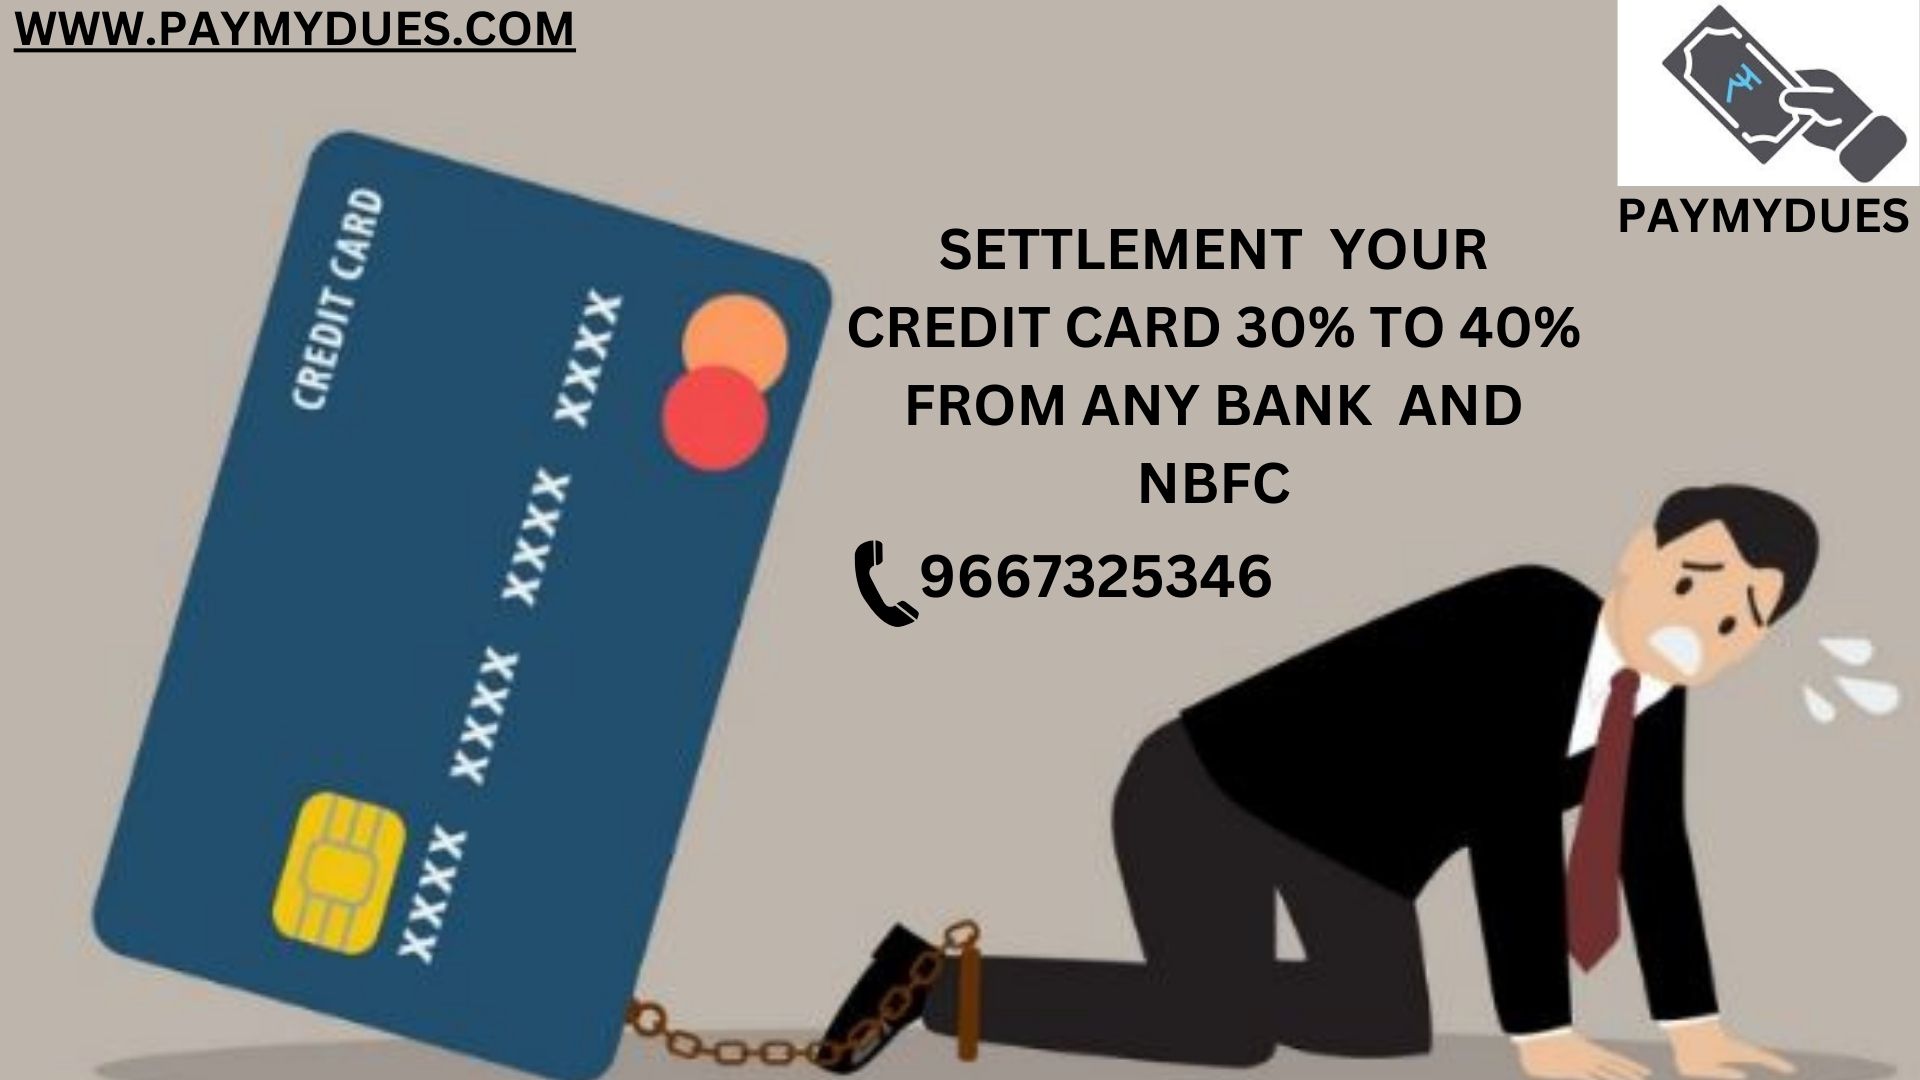 SETTLEMENT YOUR CREDIT CARD 30% TO 40% FROM ANY BANK AND NBFC